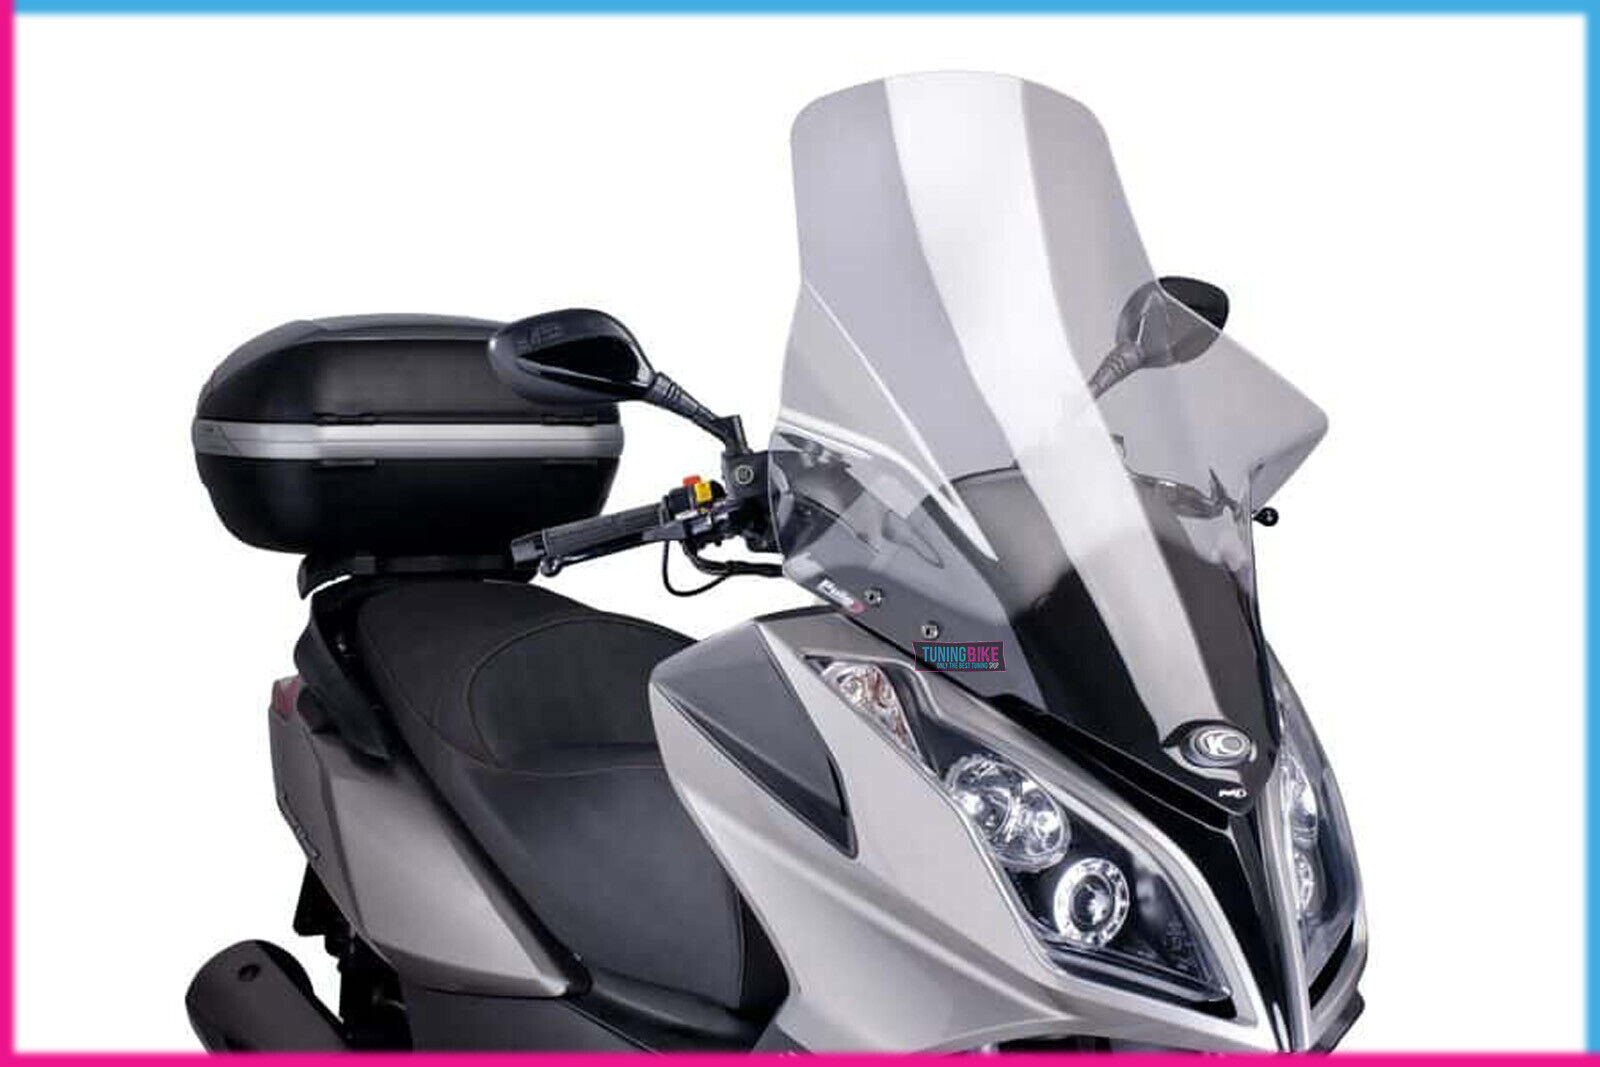 PUIG SCREEN 4 years warranty V-TECH TOUR. Fixed price for sale FOR -2012 300i DOWNTOWN -CLEAR KYMCO